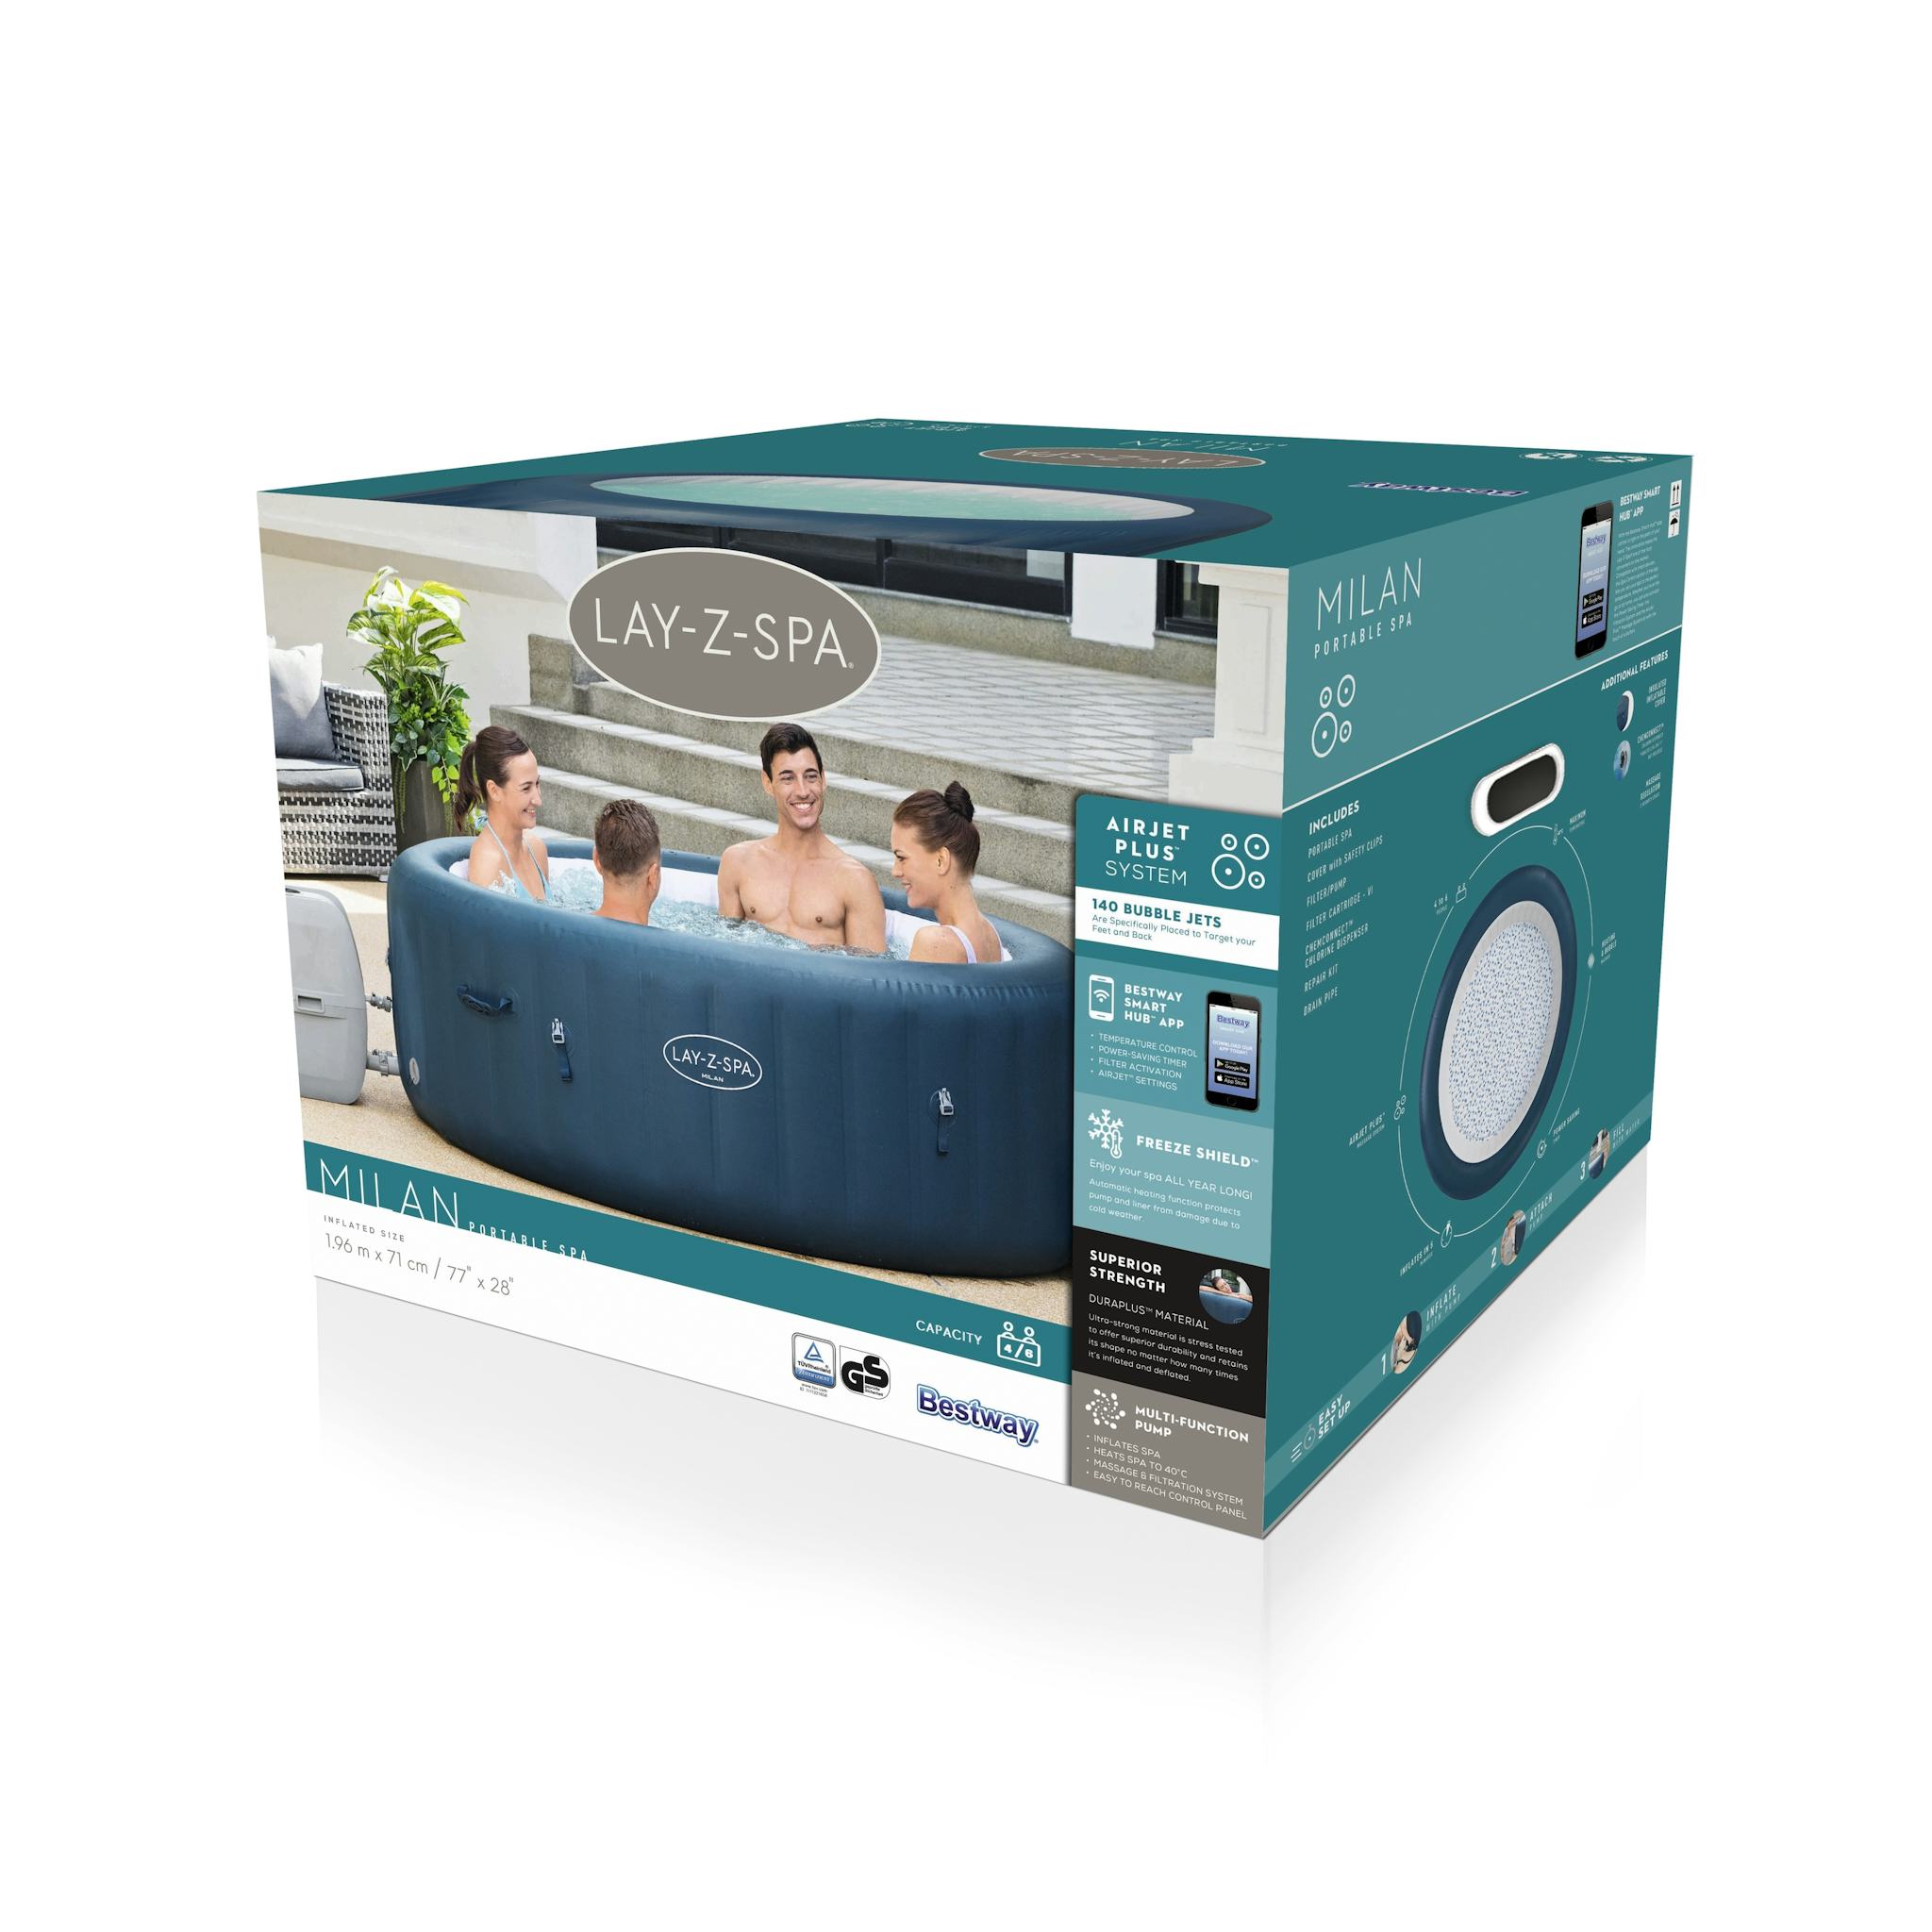 Spas Gonflables Spa gonflable rond Lay-Z-Spa Milan Airjet Plus™ 4 - 6 personnes Bestway 11